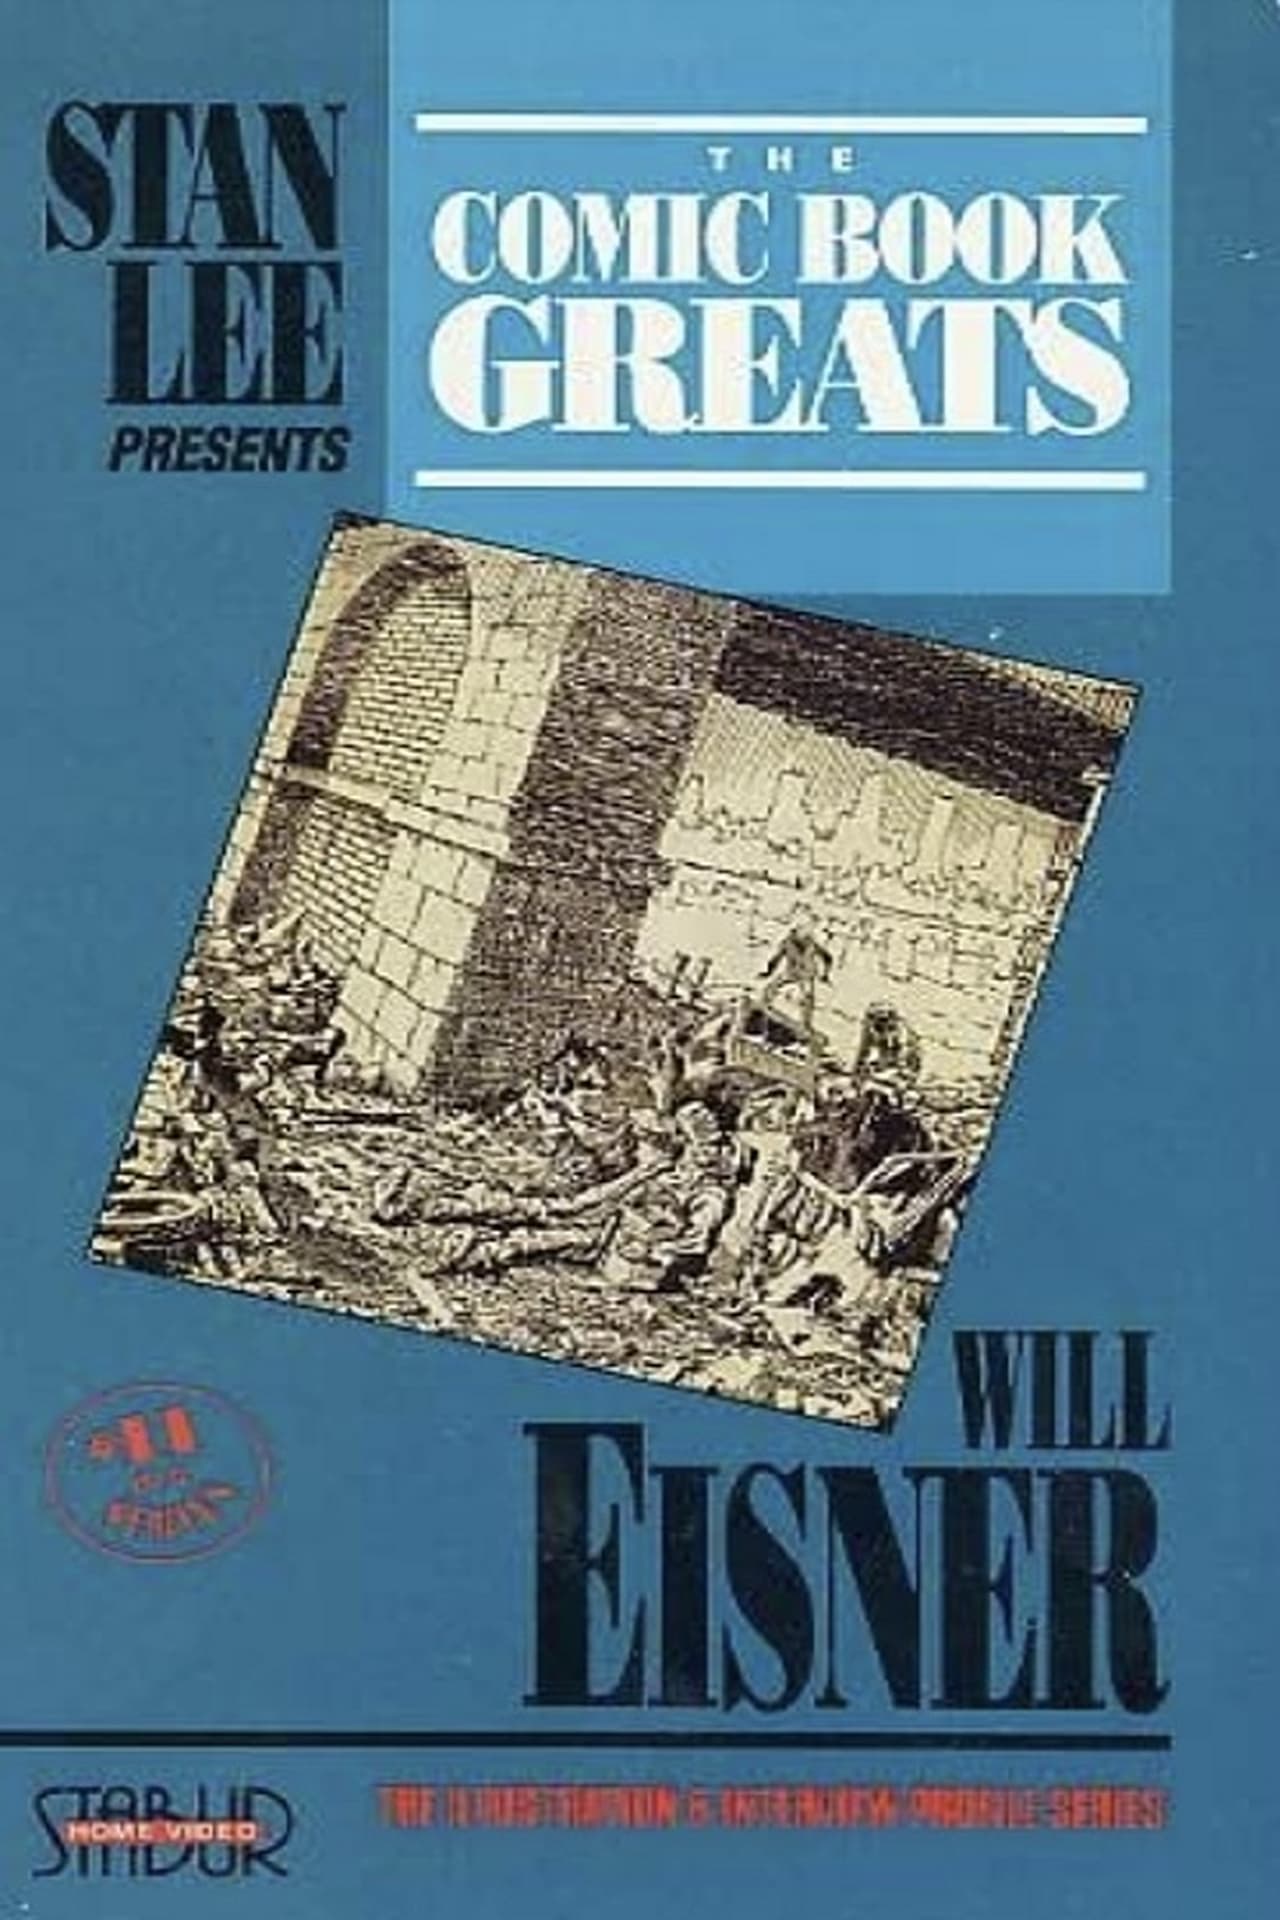 The Comic Book Greats: Will Eisner